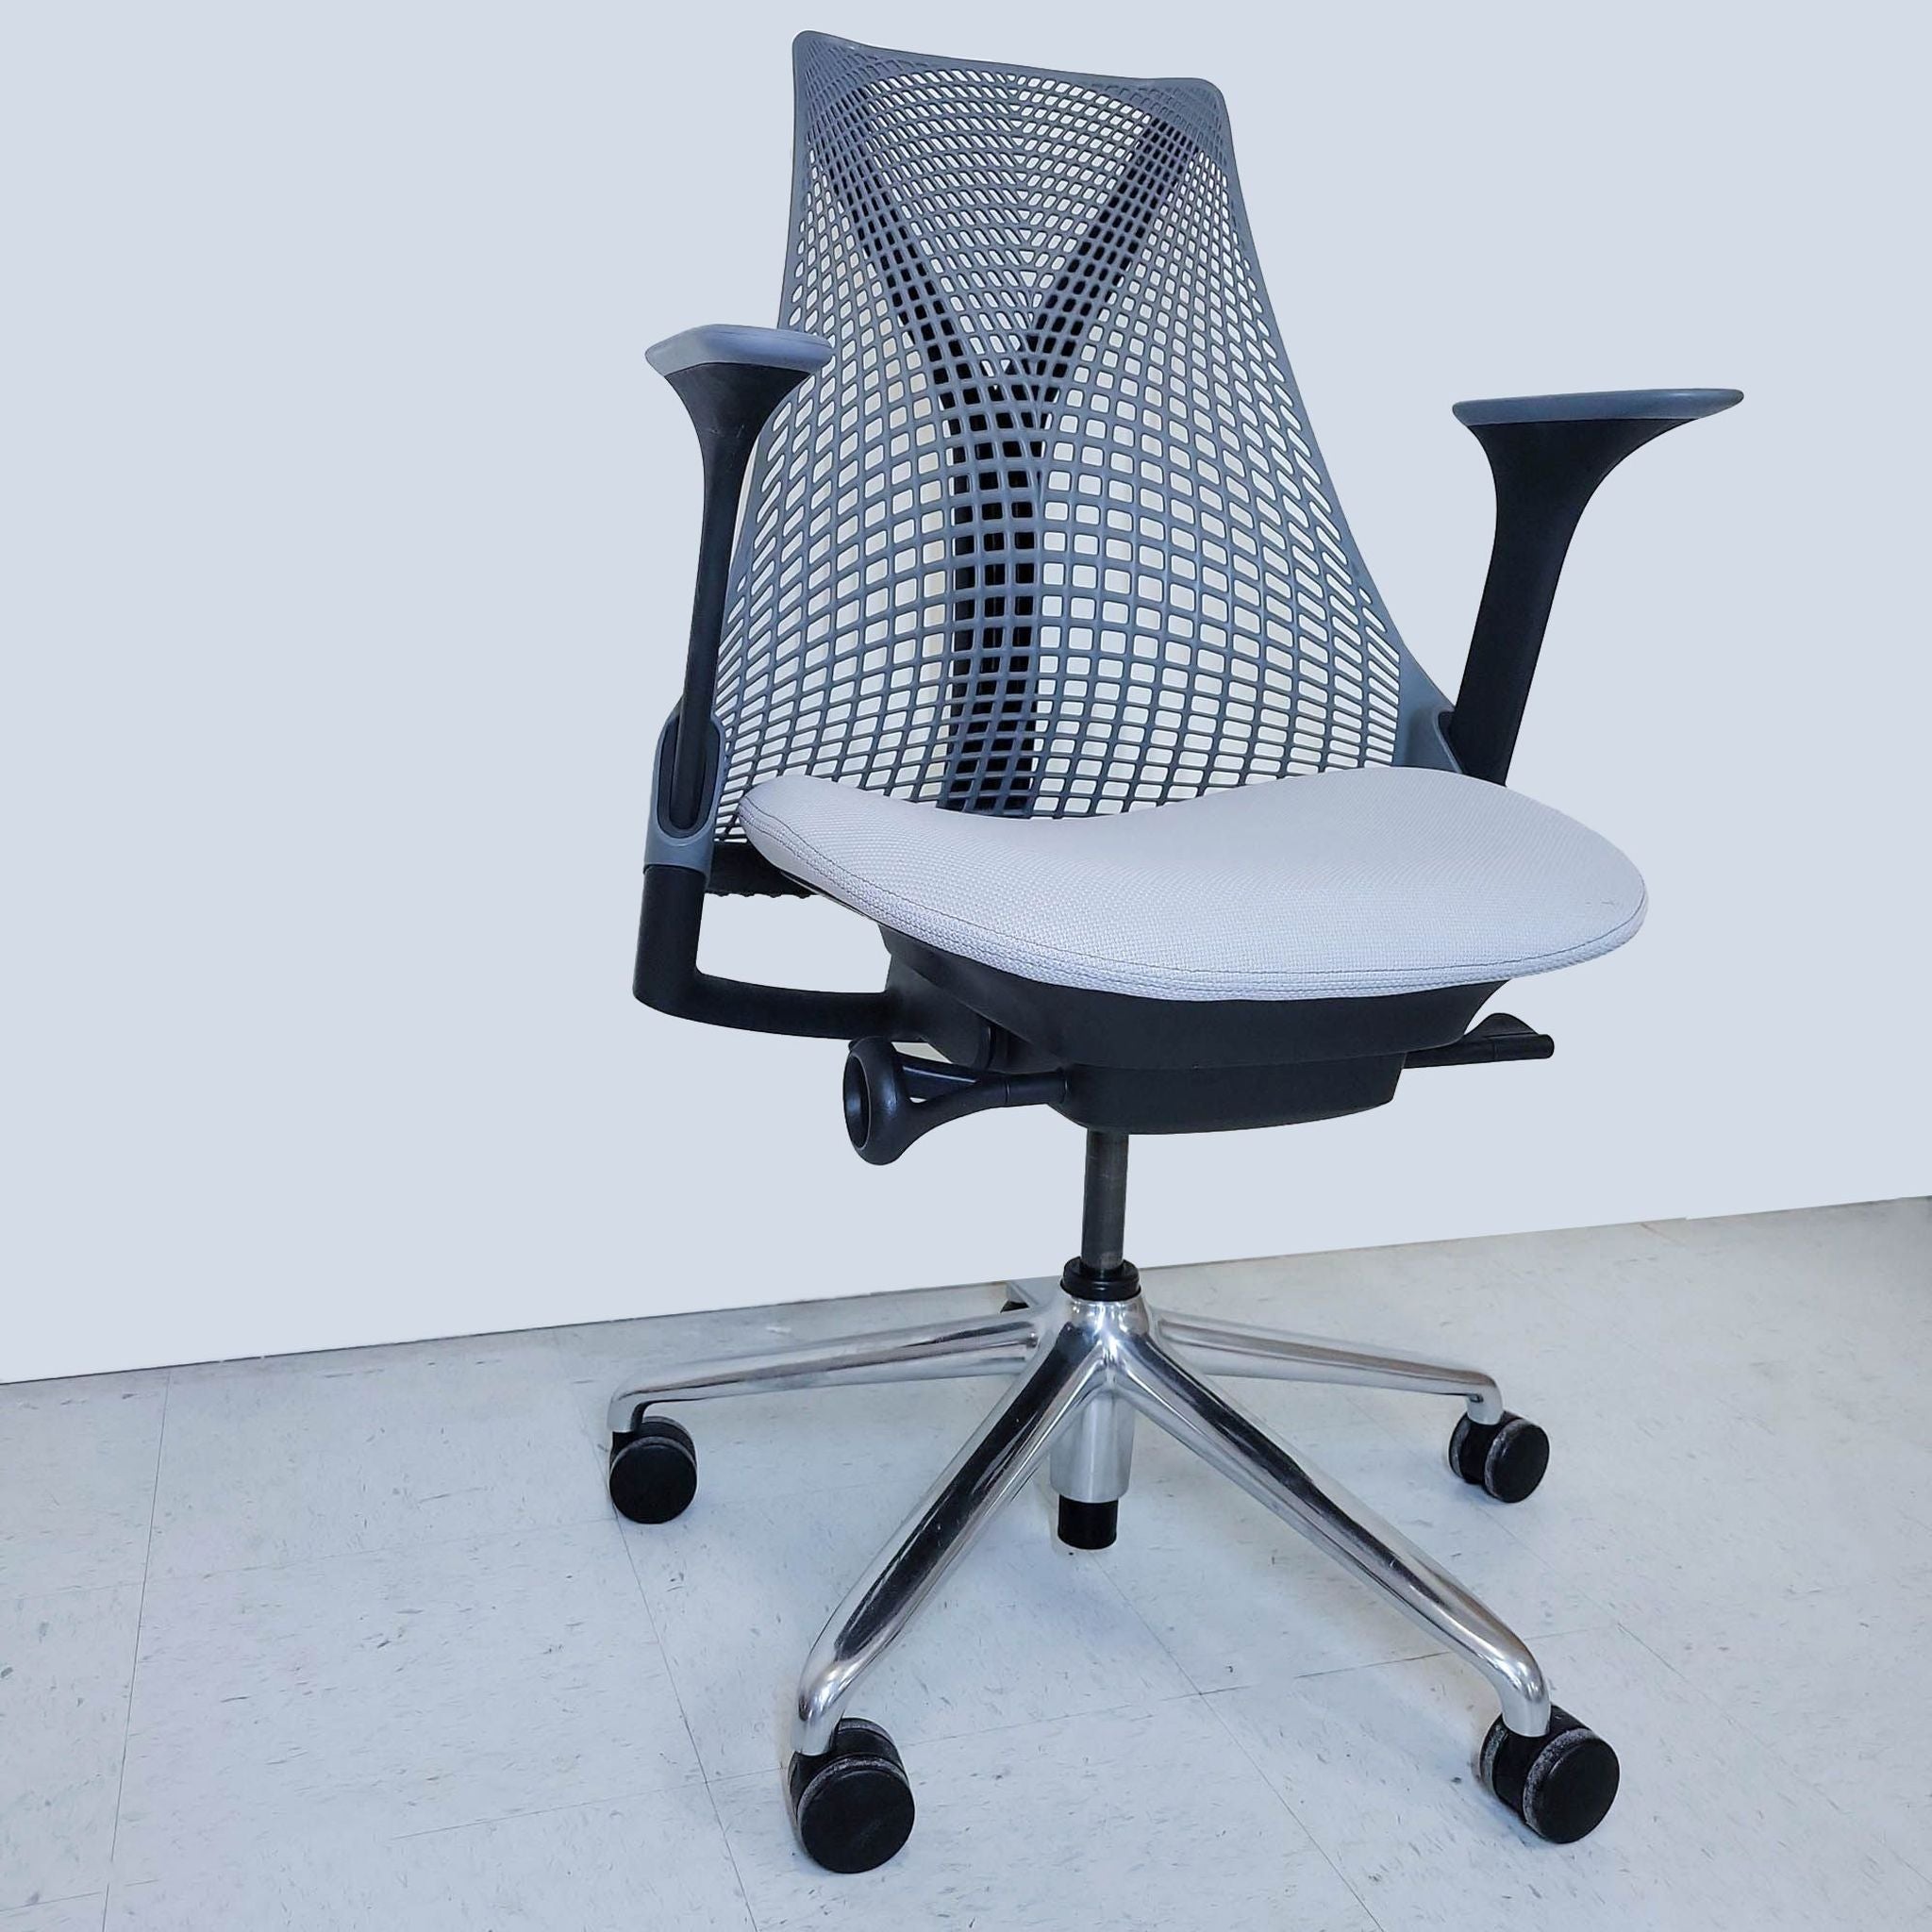 Herman Miller brand ergonomic mesh office chair with adjustable arms and a five-star base with casters.